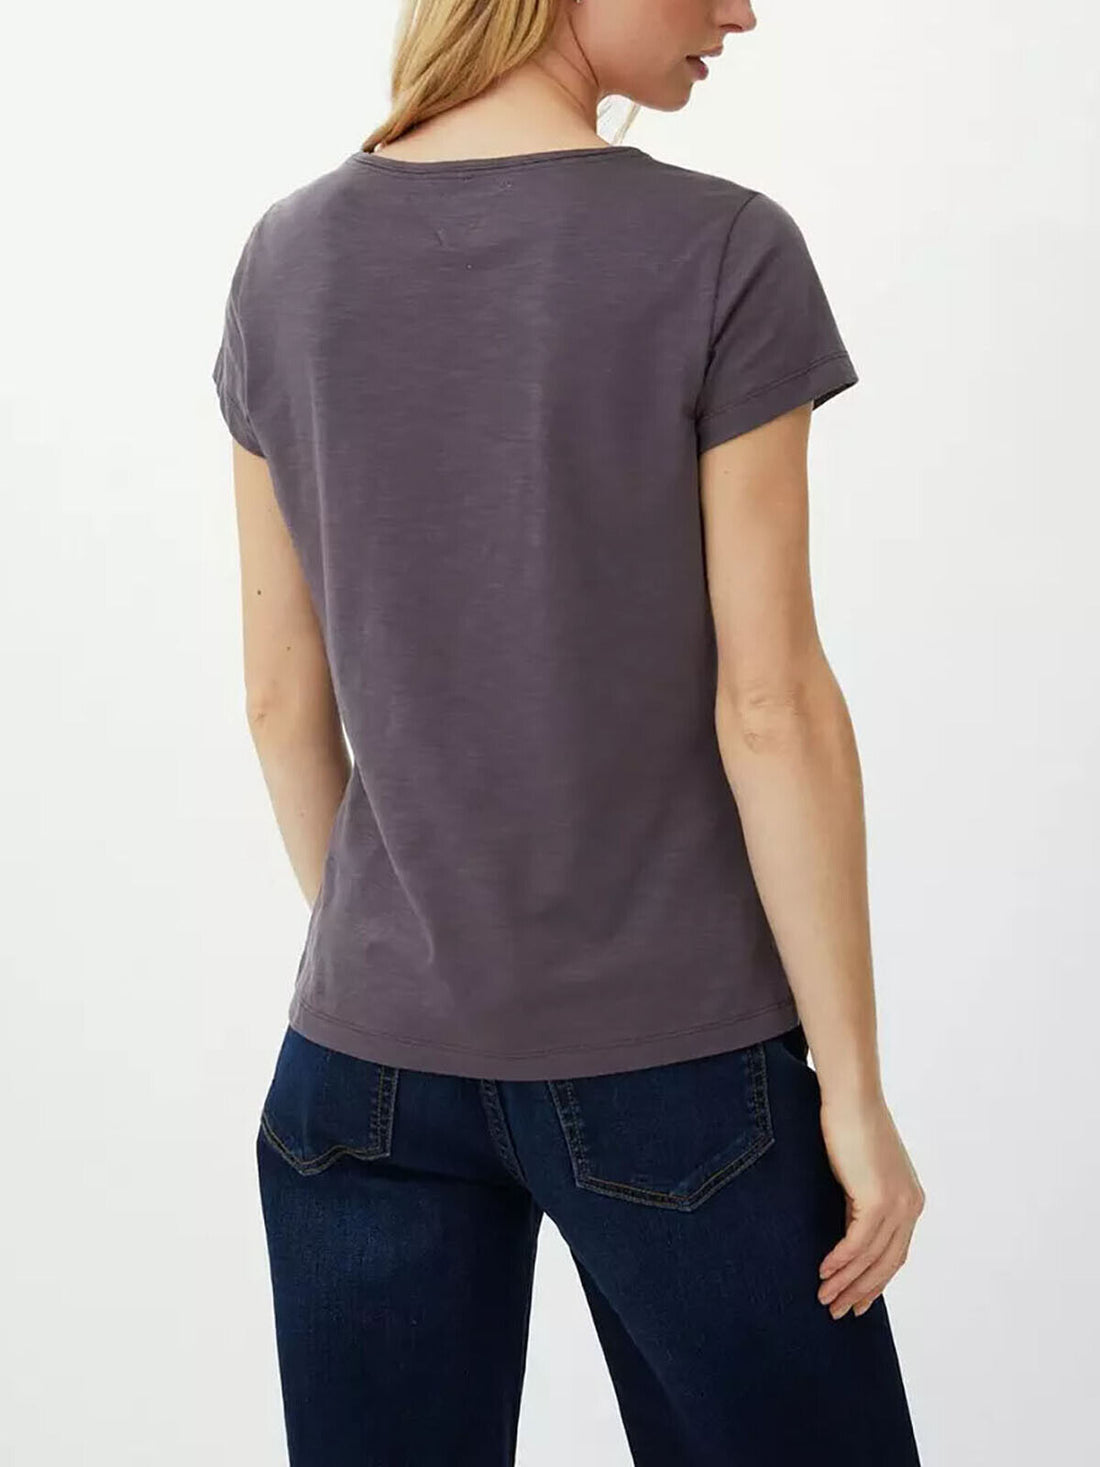 Mantaray Charcoal Pure Cotton Pocket T-Shirt in Sizes 14 or 16